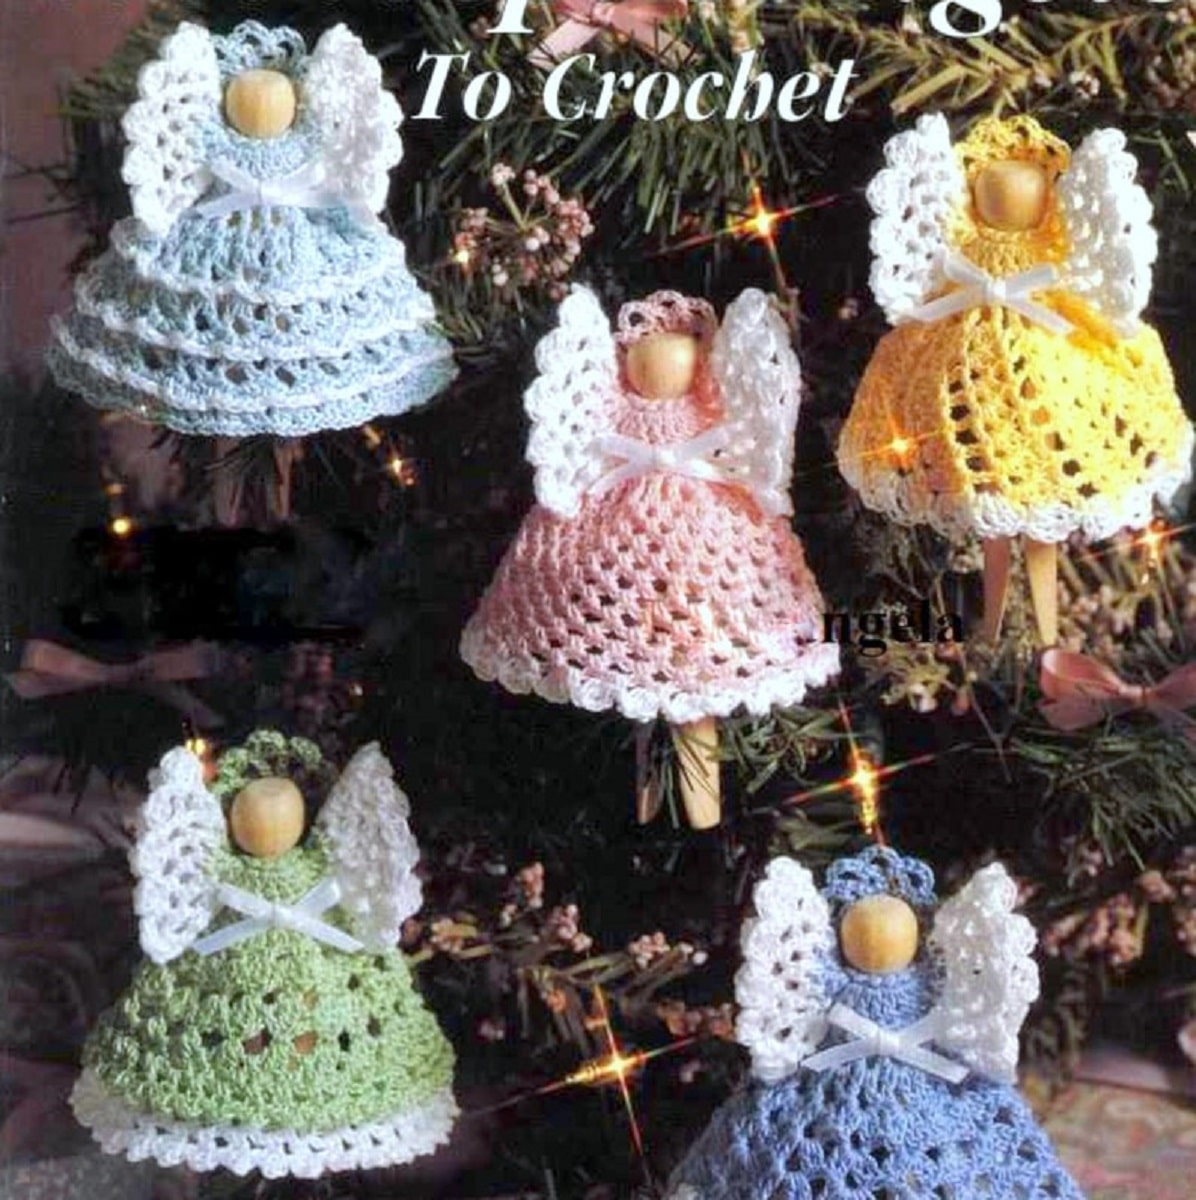 Five clothespin Christmas angels hanging from a Christmas tree with crochet dresses and wings in blue, green, pink, and yellow.